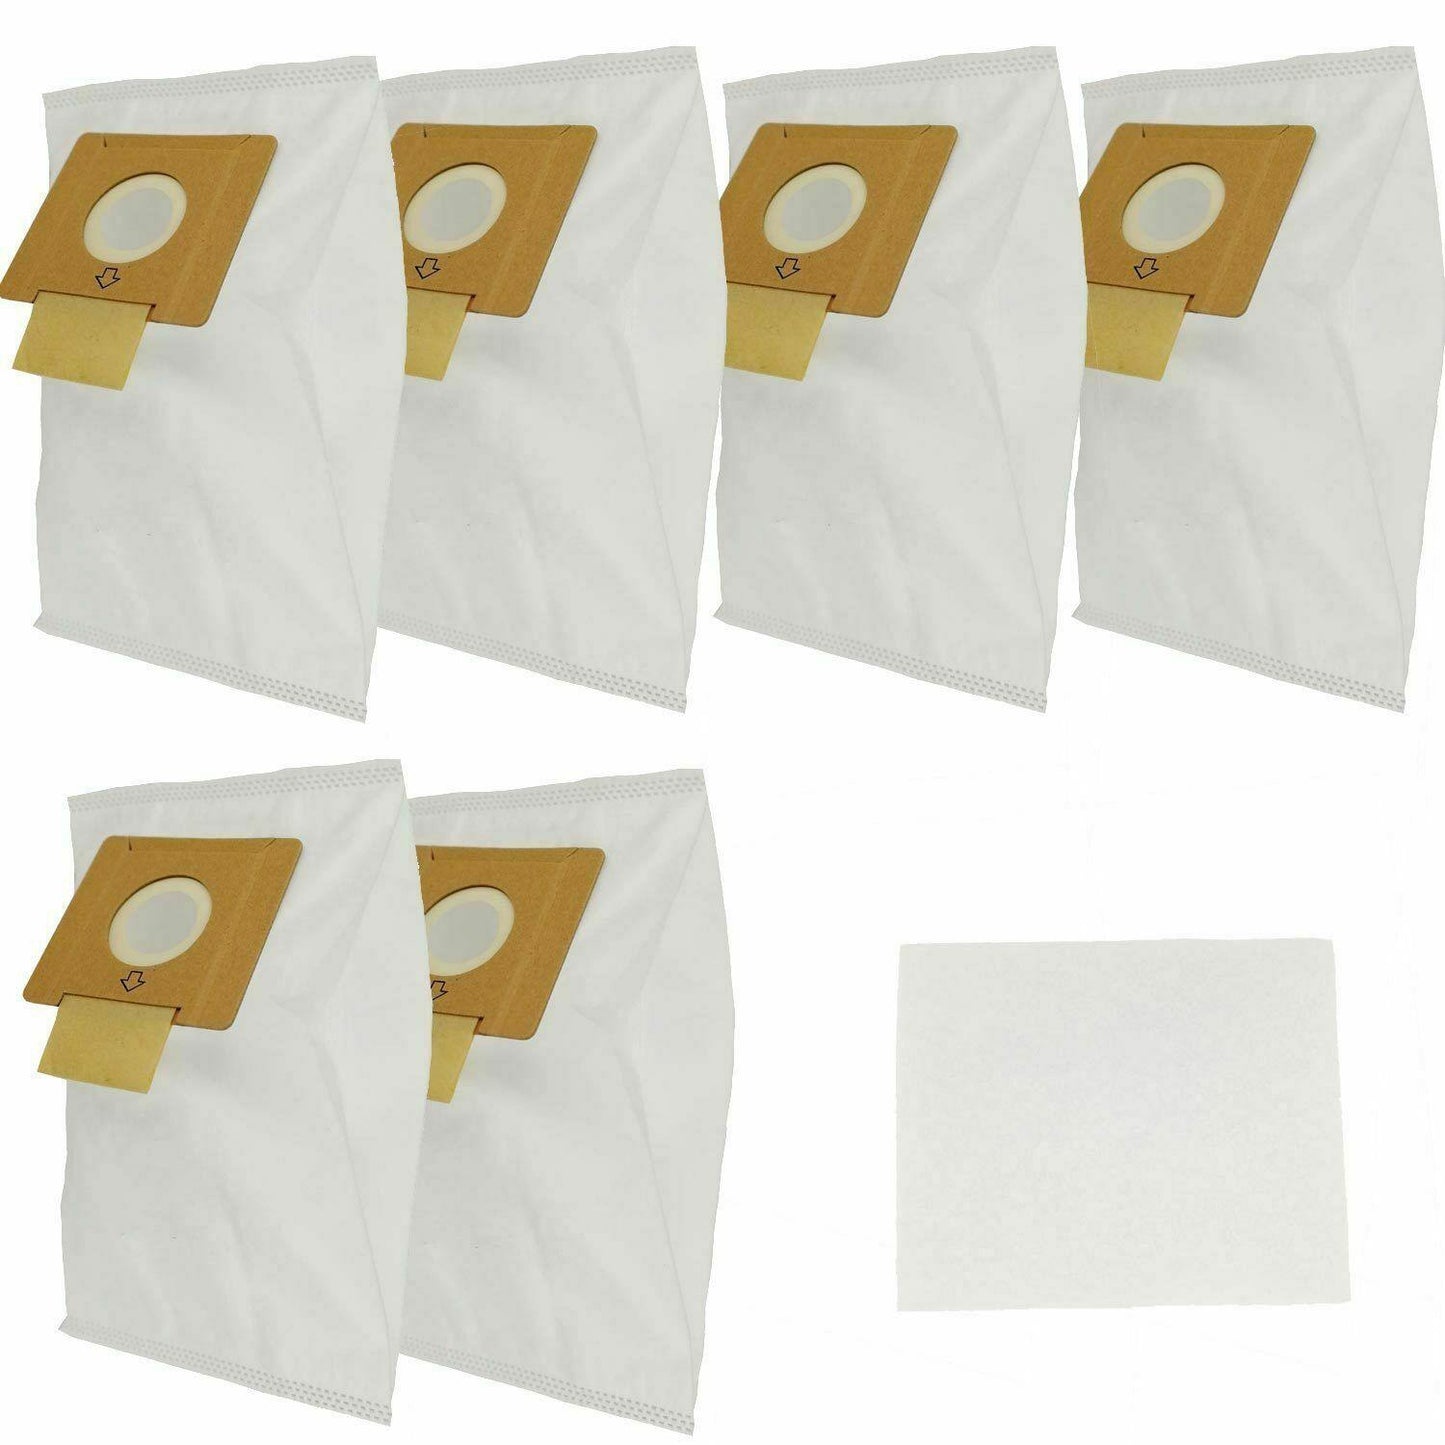 6X Vacuum Dust Bags for Hoover Smart R1 4410 4430 5001 H4012 Sparesbarn